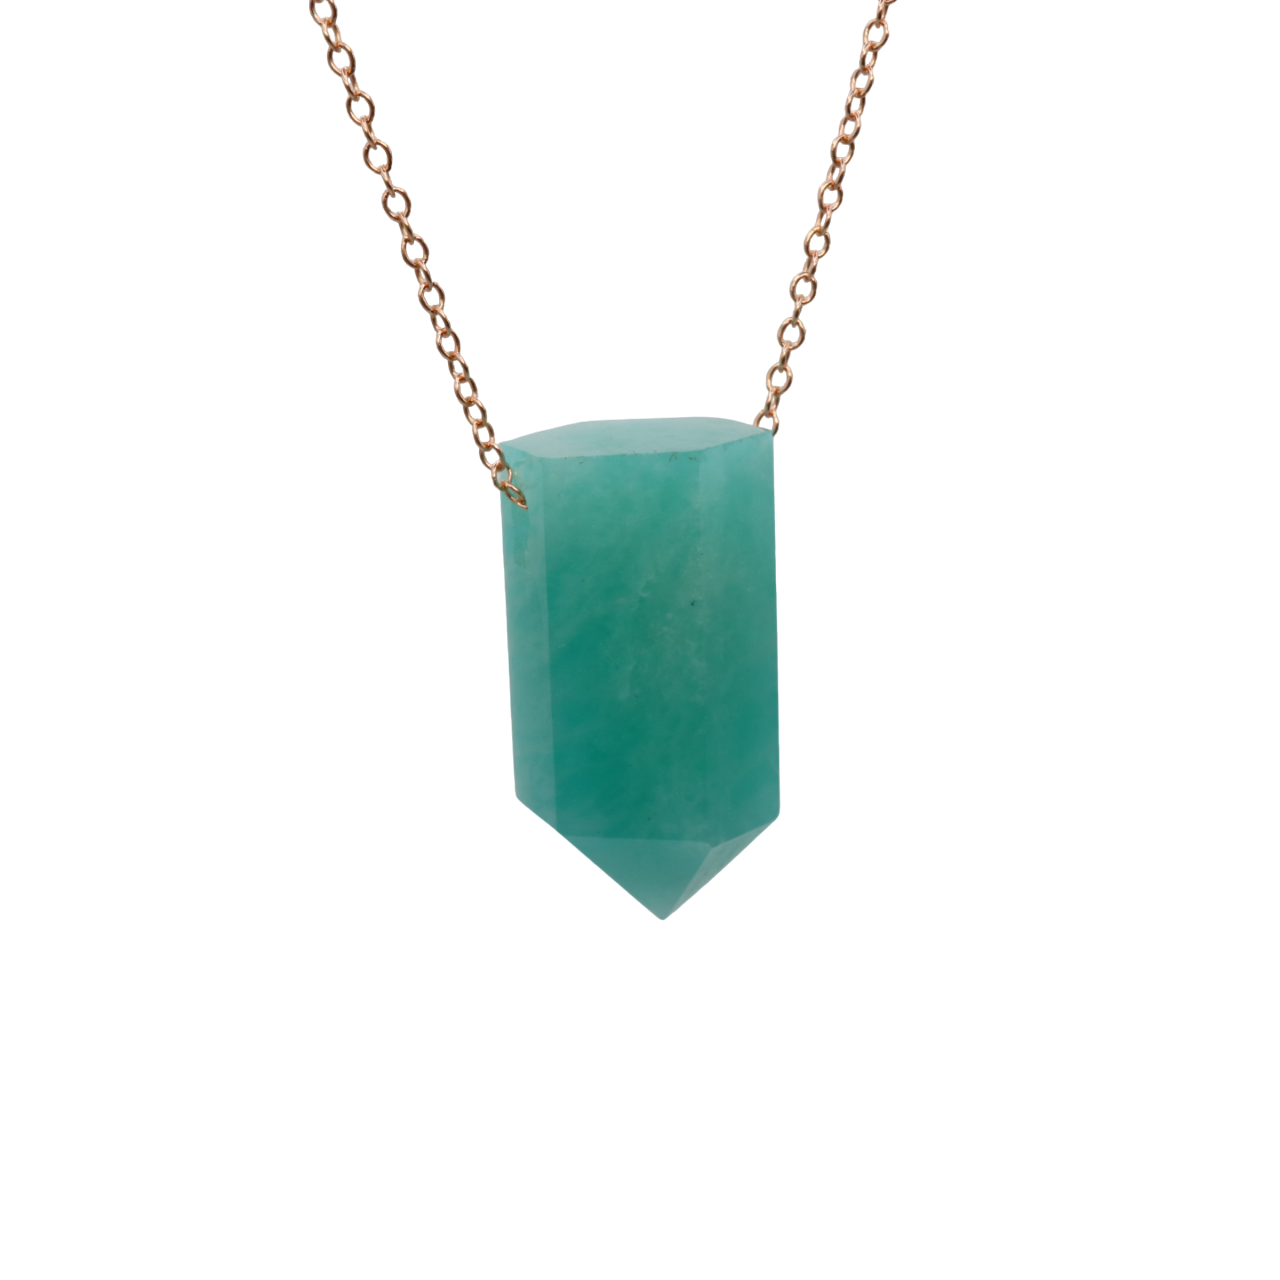 Amazonite on a fine Rose Gold plated 925 Sterling Silver chain